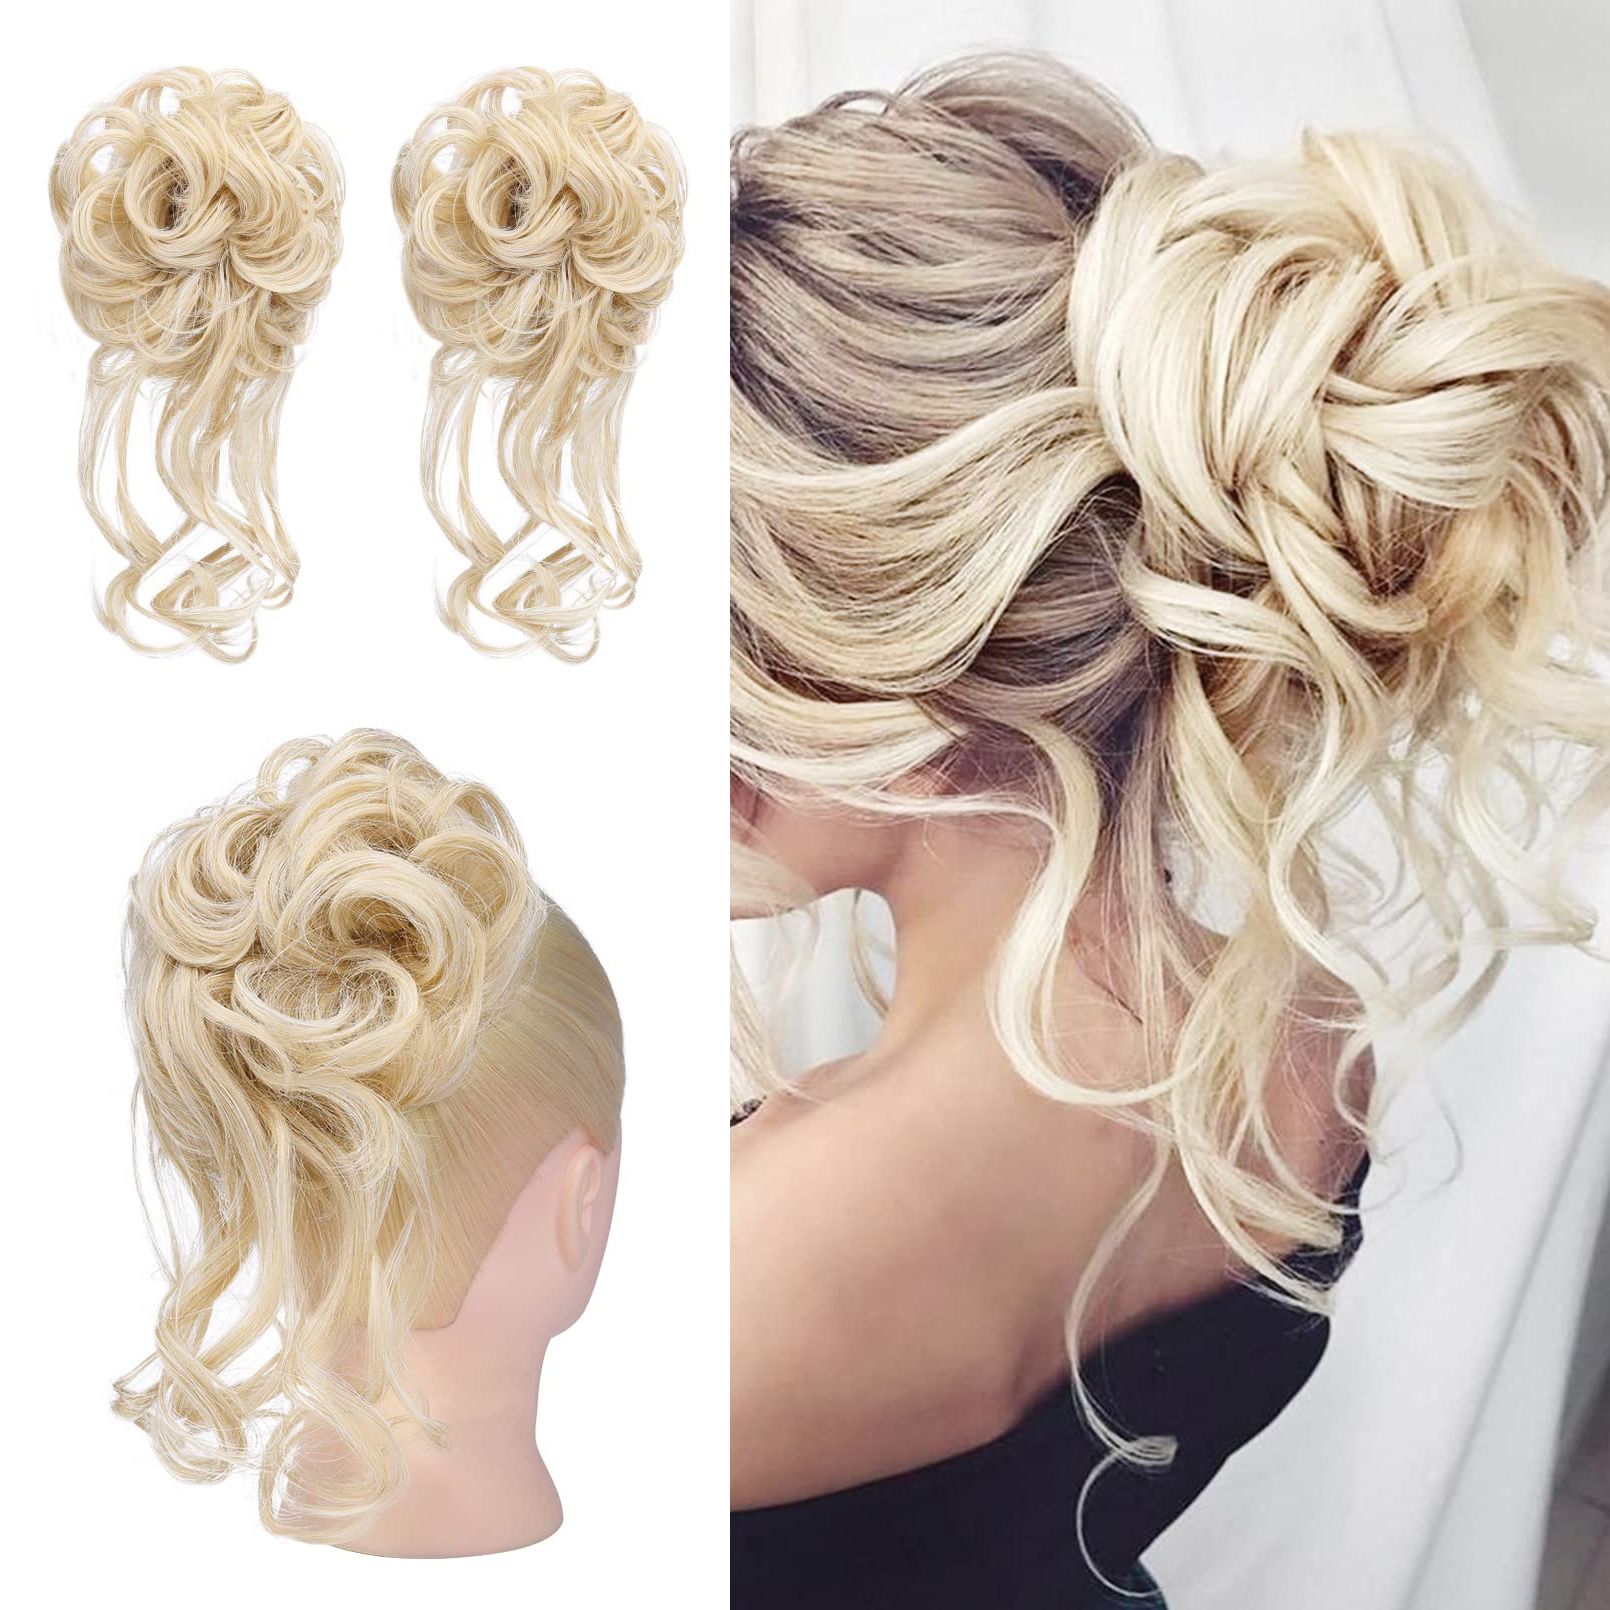 Hoojih Messy Bun Hair Piece, 2pcs Tousled Updo With Tendrils Hair Bun  Extensions Wavy Curly Hair Wrap Ponytail Hairpieces Thick Hair Scrunchies  For Women Girls – Cool Light Blonde 2 Pack Cool Within 2018 Bun Updo With Accessories For Thick Hair (View 2 of 15)